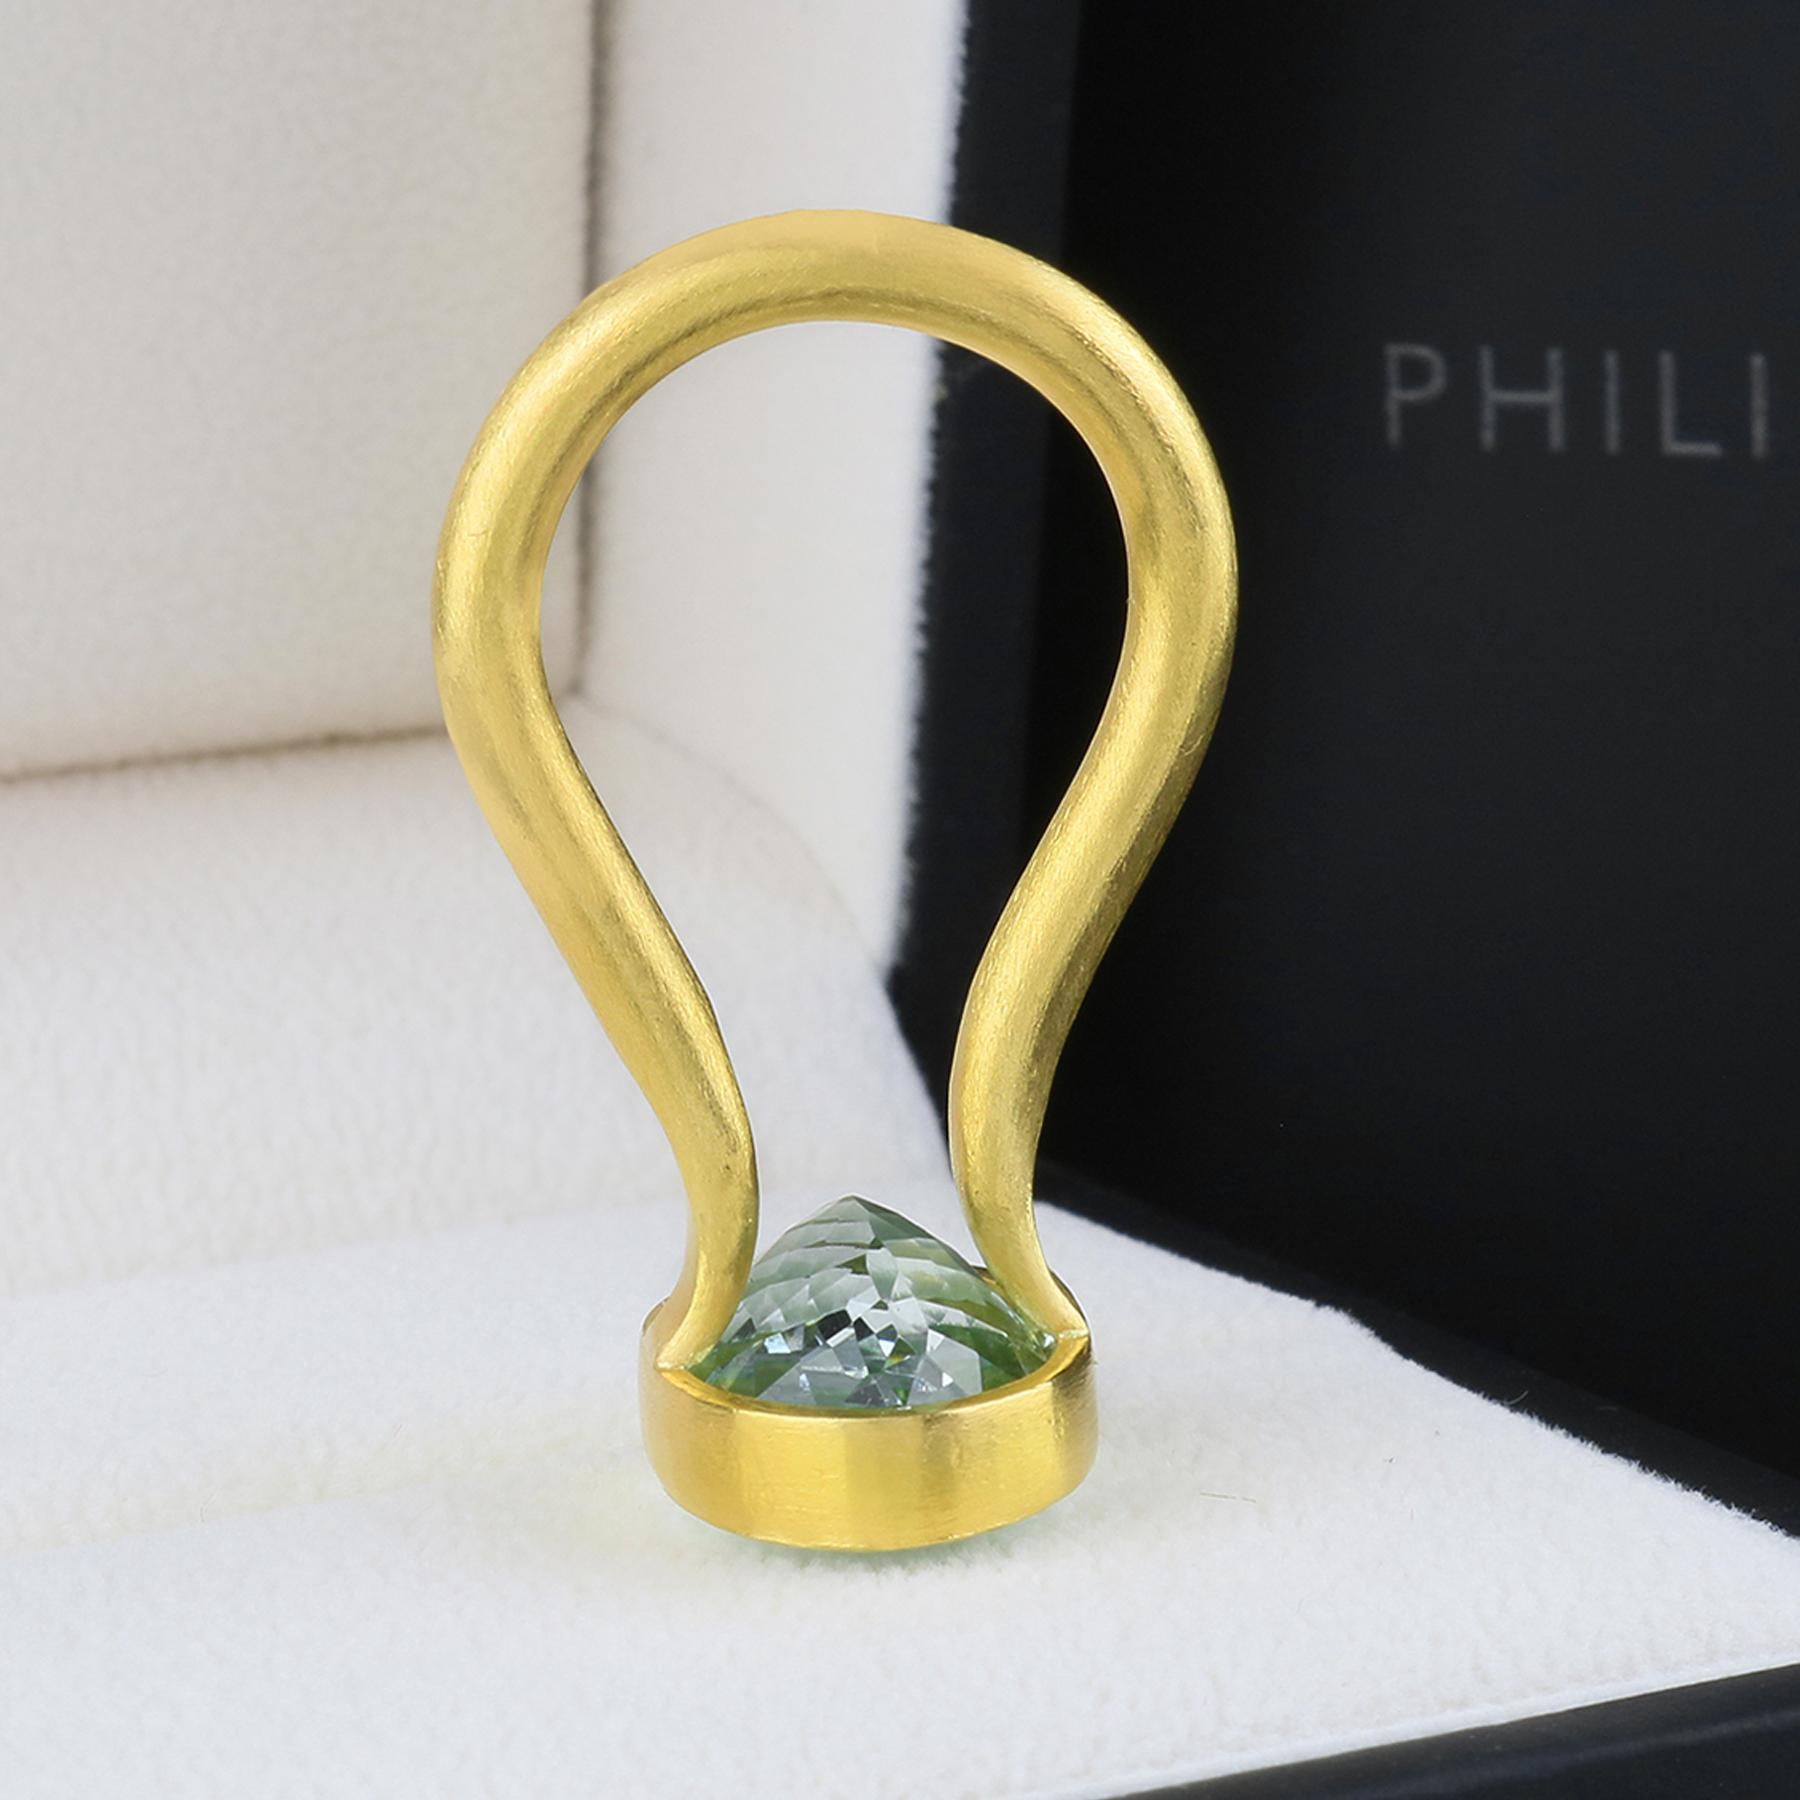 Artisan PHILIPPE SPENCER 12.6 Ct. Aquamarine in 22K and 20K Gold Statement Ring For Sale